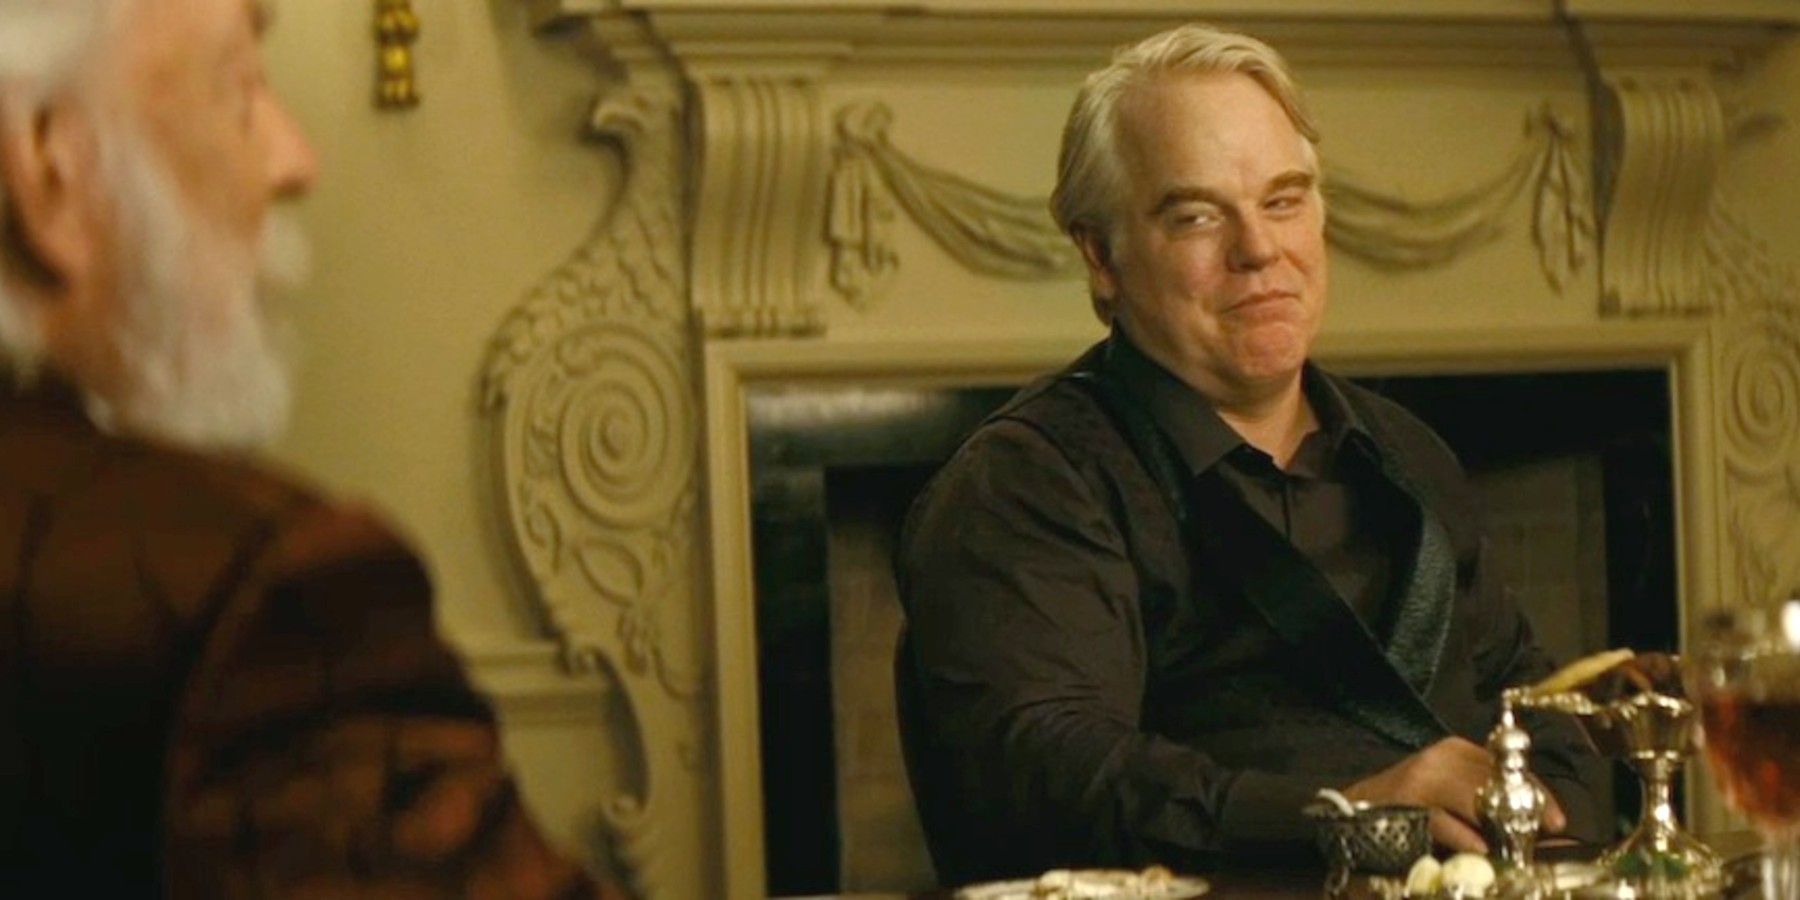 Plutarch Heavensbee in Catching Fire